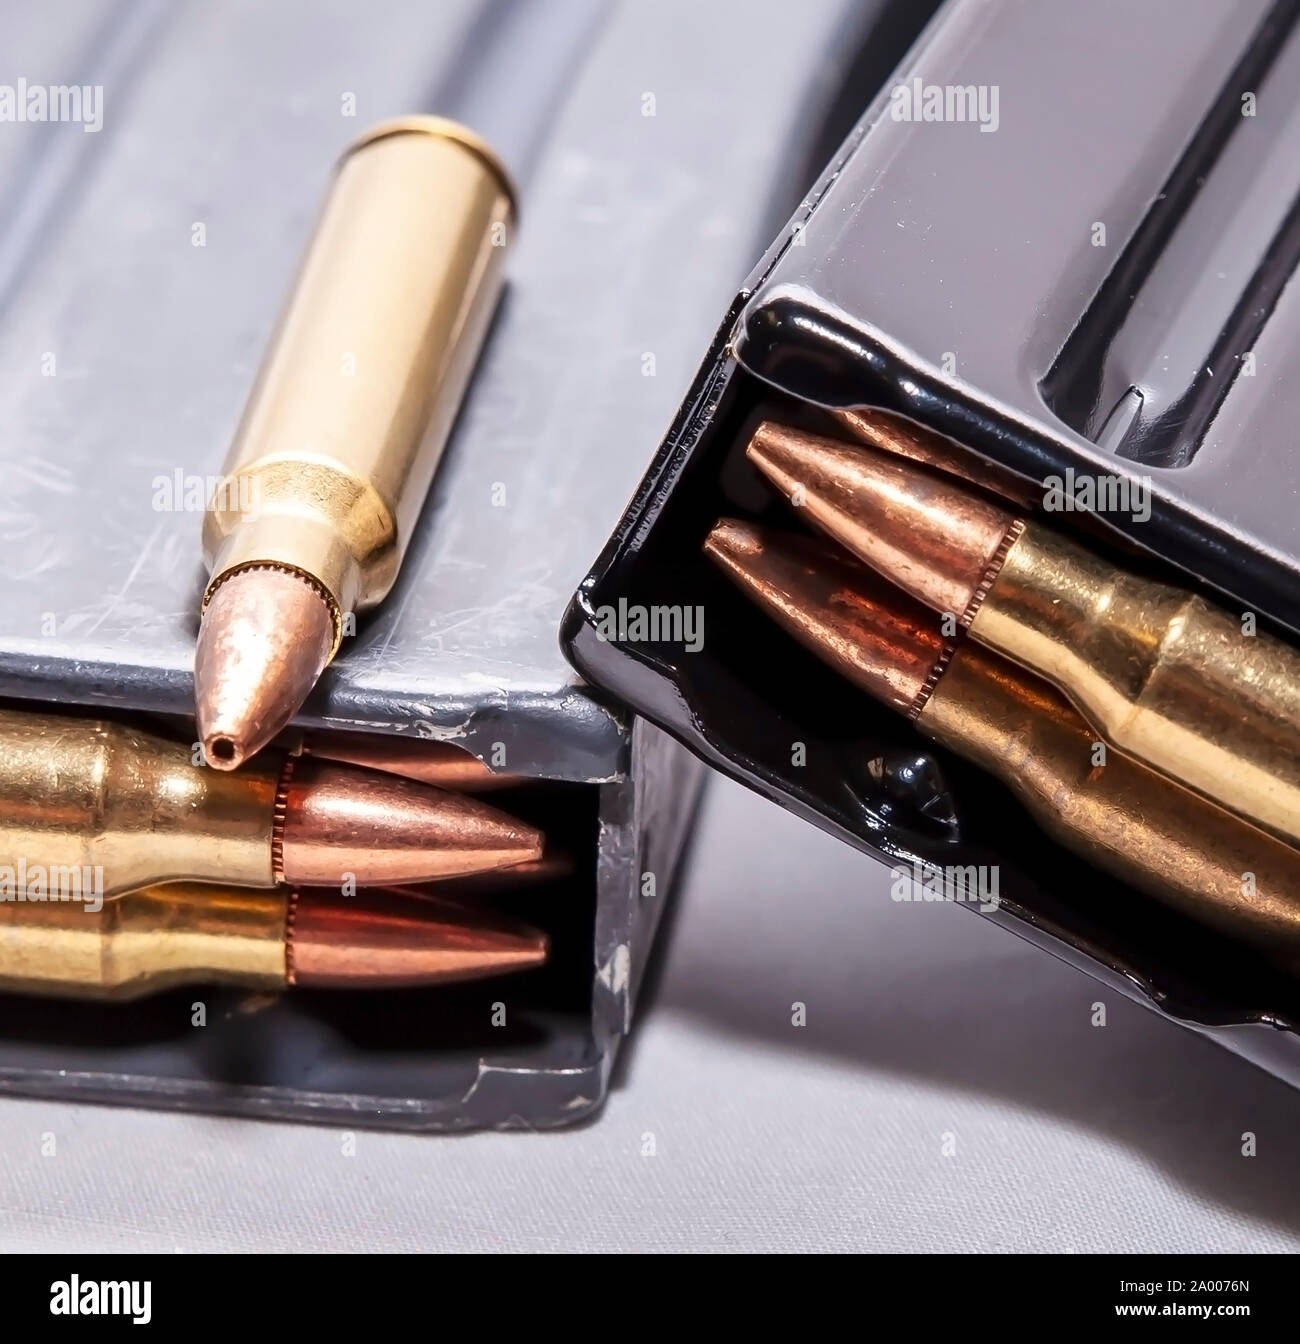 https://c8.alamy.com/comp/2A0076N/two-loaded-rifle-magazines-with-a-223-caliber-bullet-on-top-of-one-of-them-on-a-white-background-2A0076N.jpg